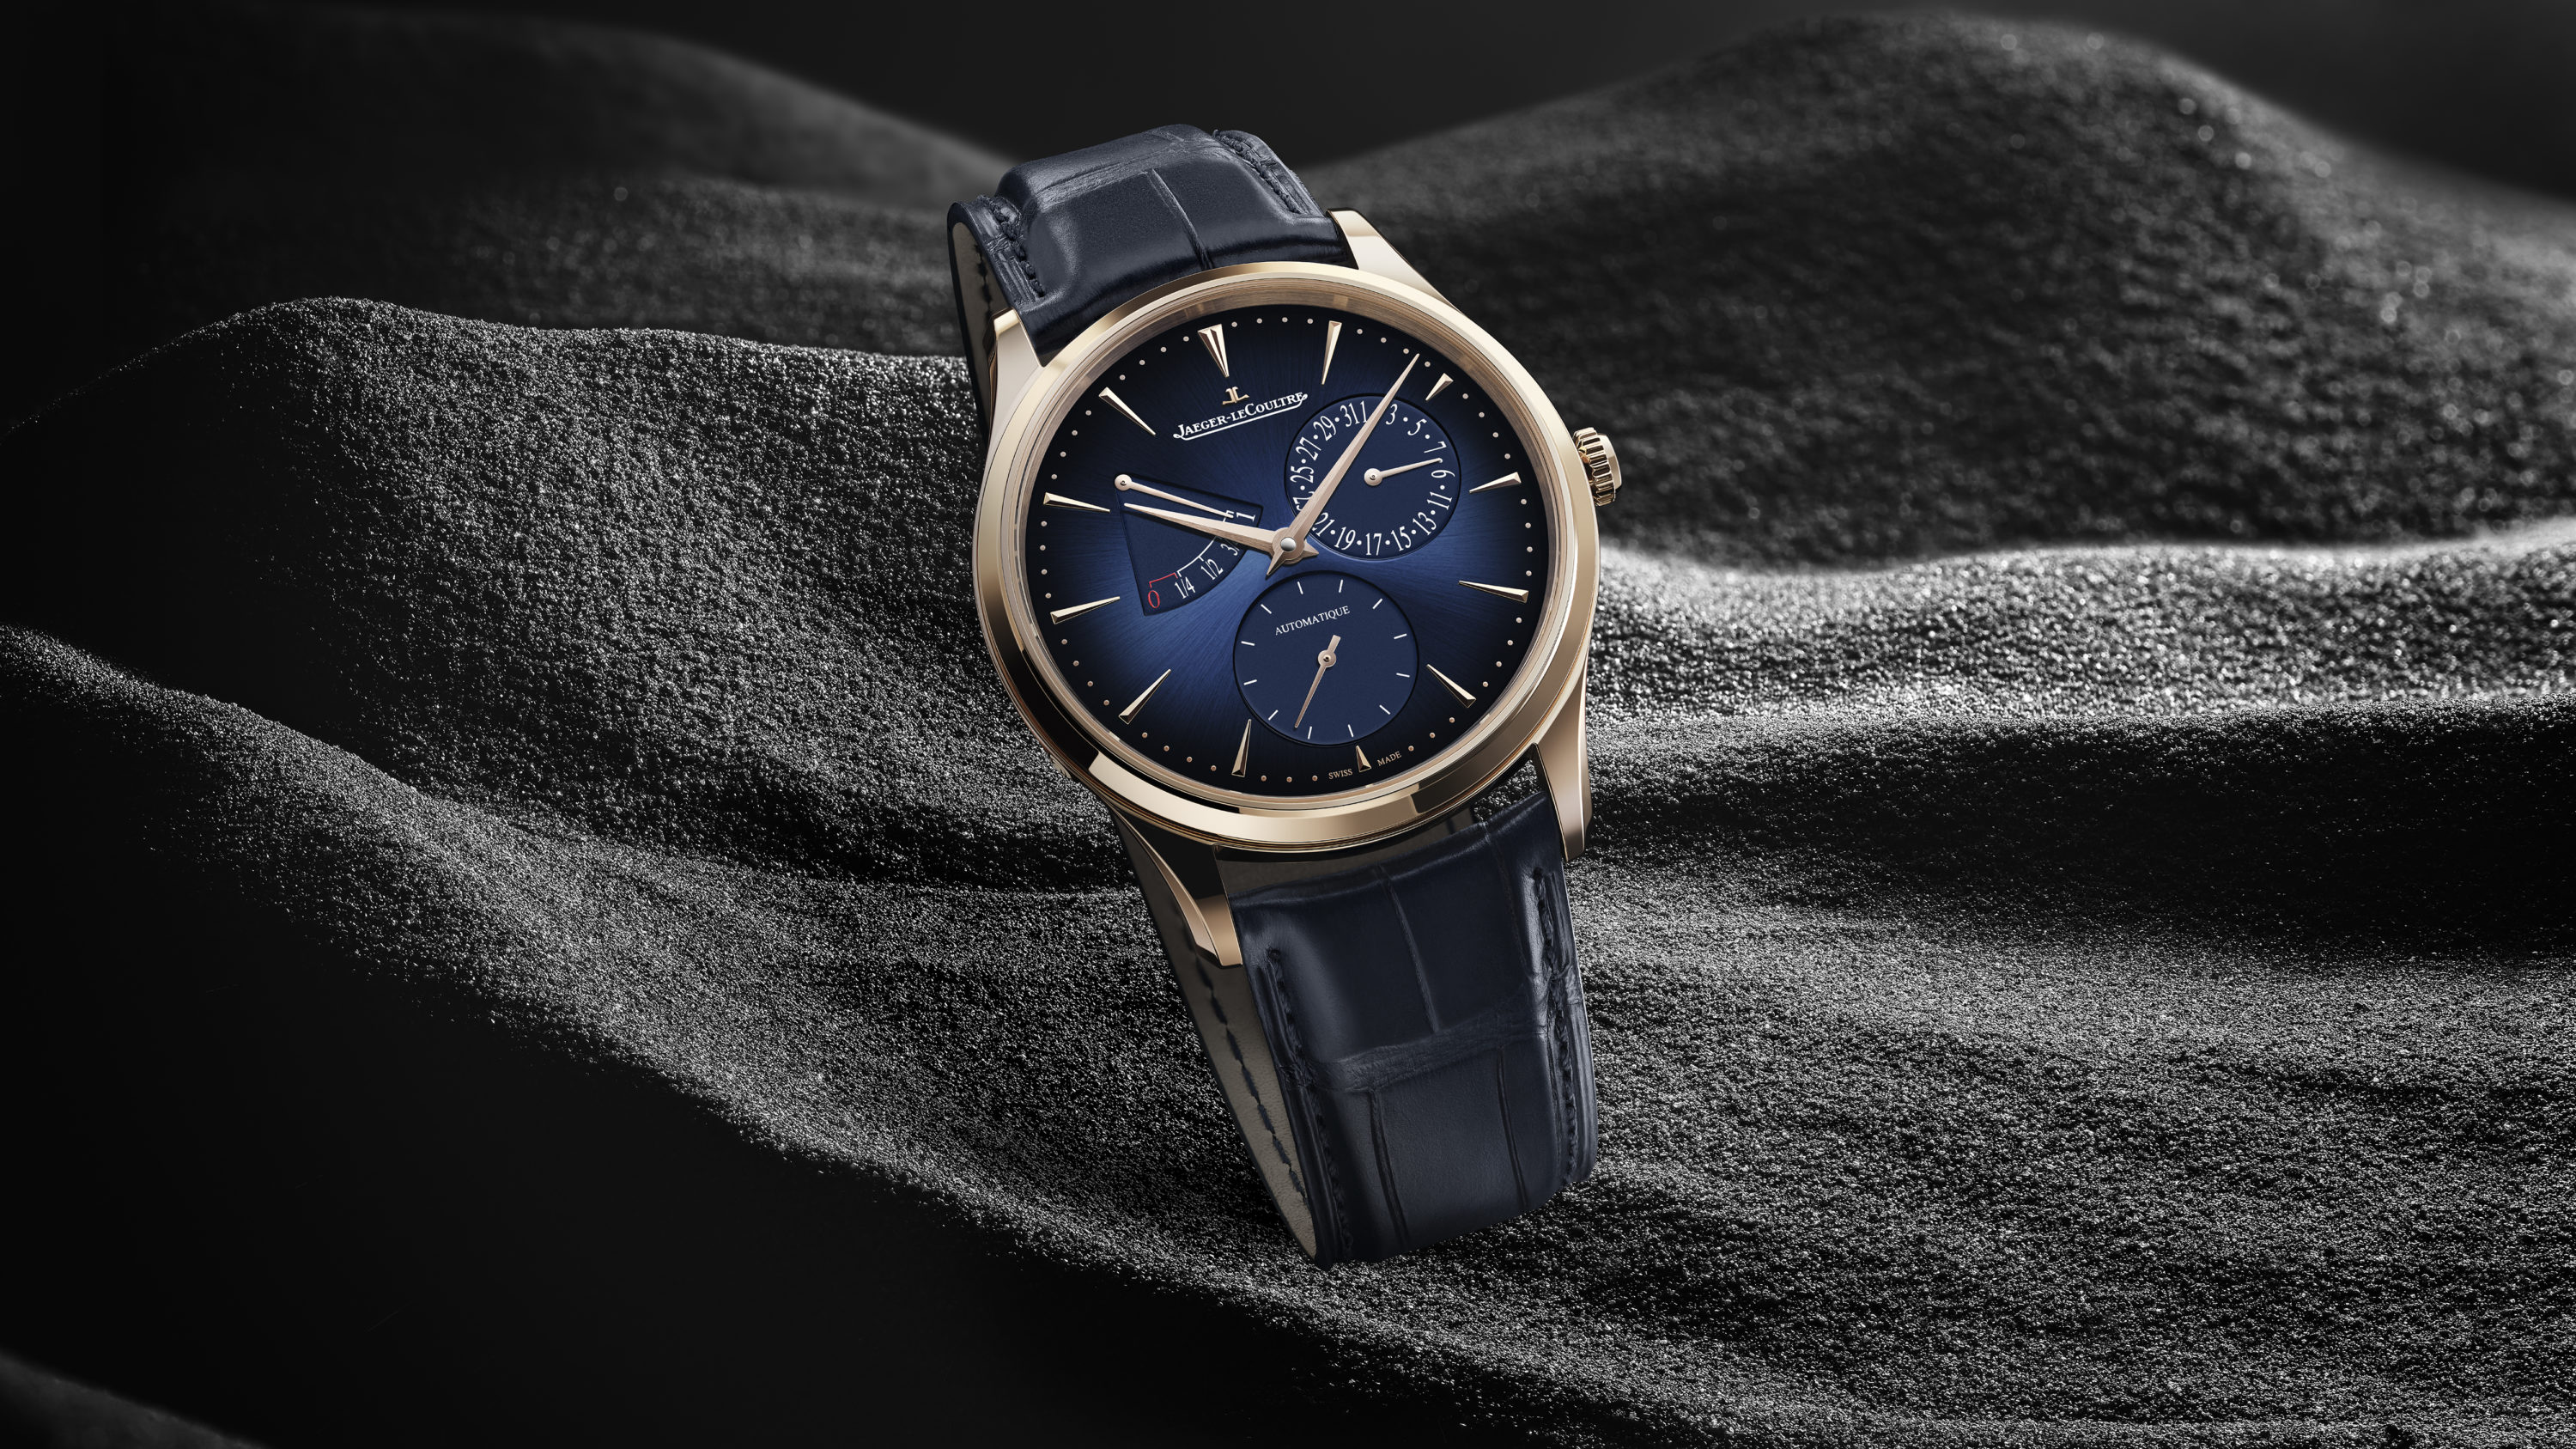 Jaeger-LeCoultre Revisits the Master Ultra Thin Power Reserve